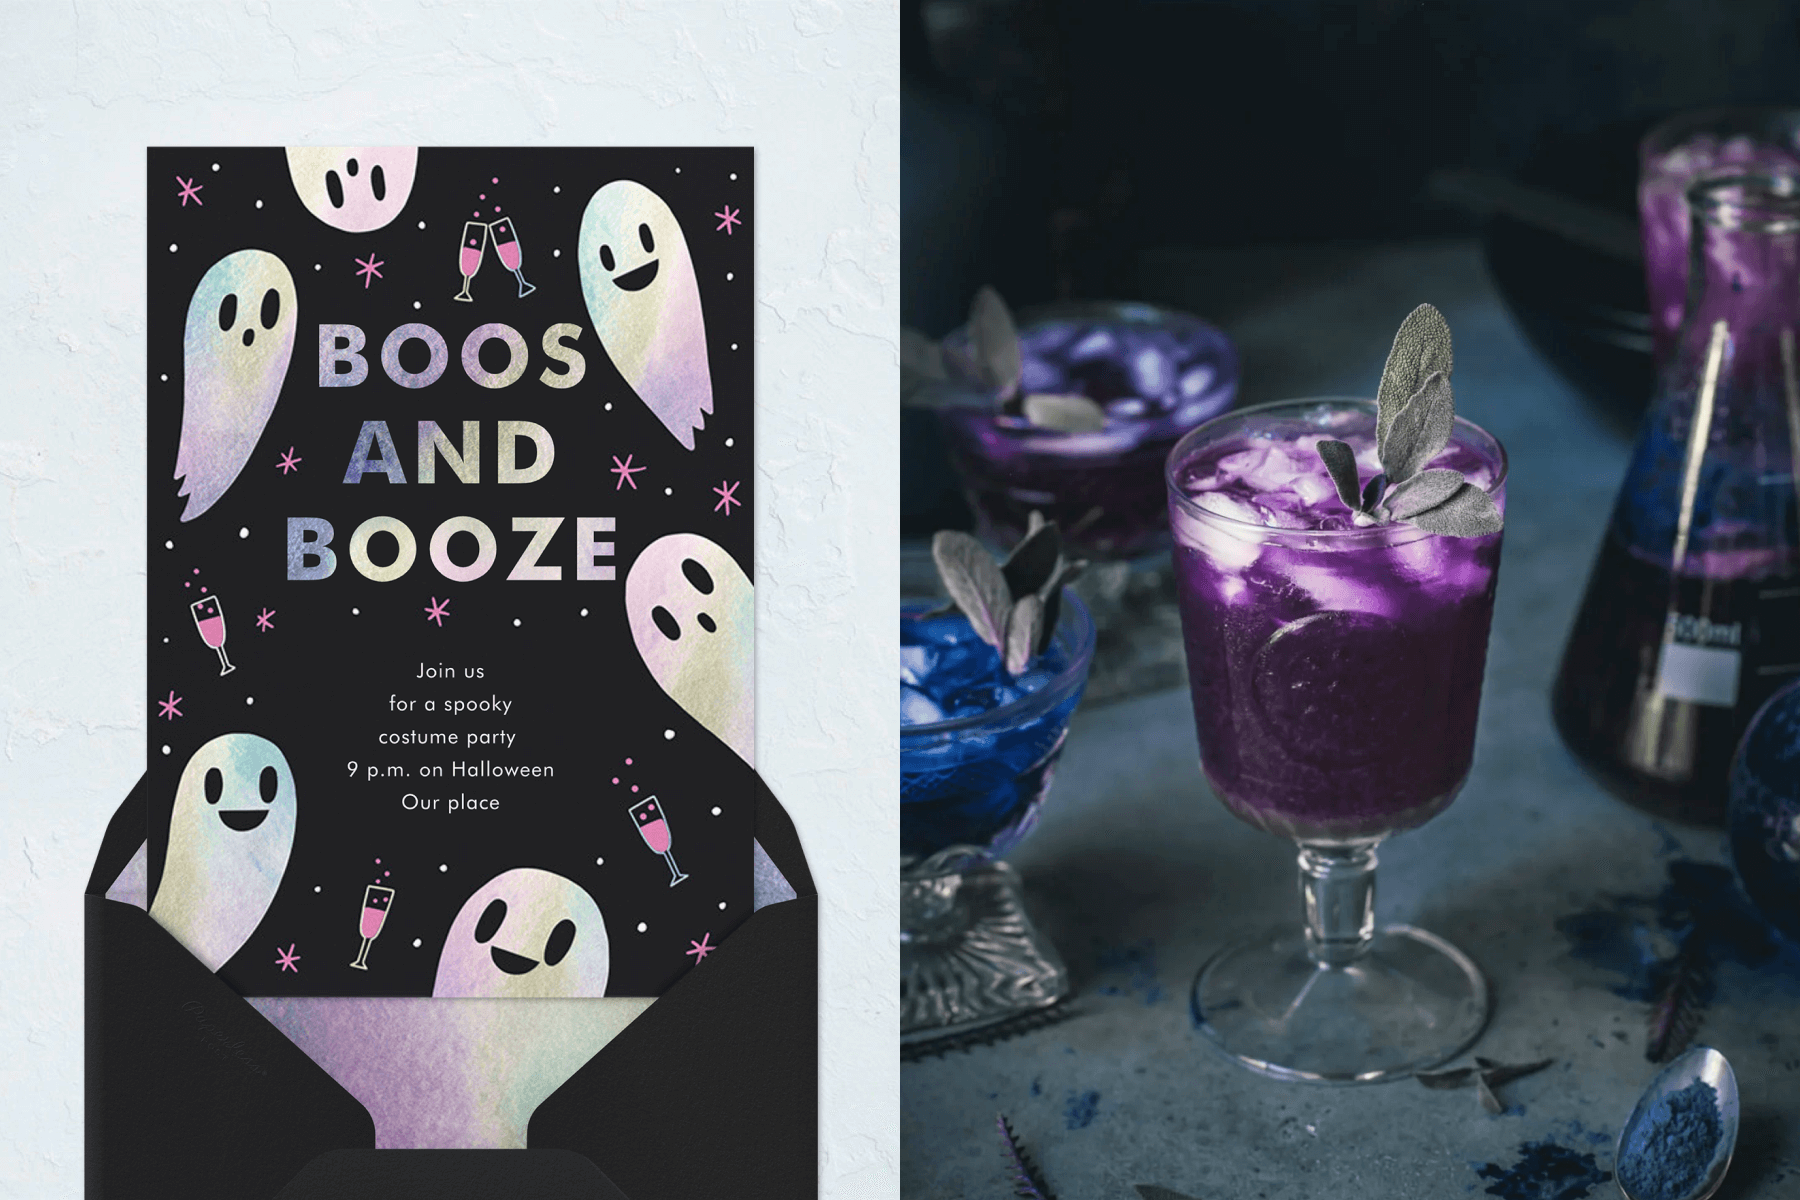 Left: A black Halloween invitation with irridescent illustrations of happy ghosts and cocktails; Right: A purple polyjuice potion cocktail surrounded by other cocktails and mixing supplies.